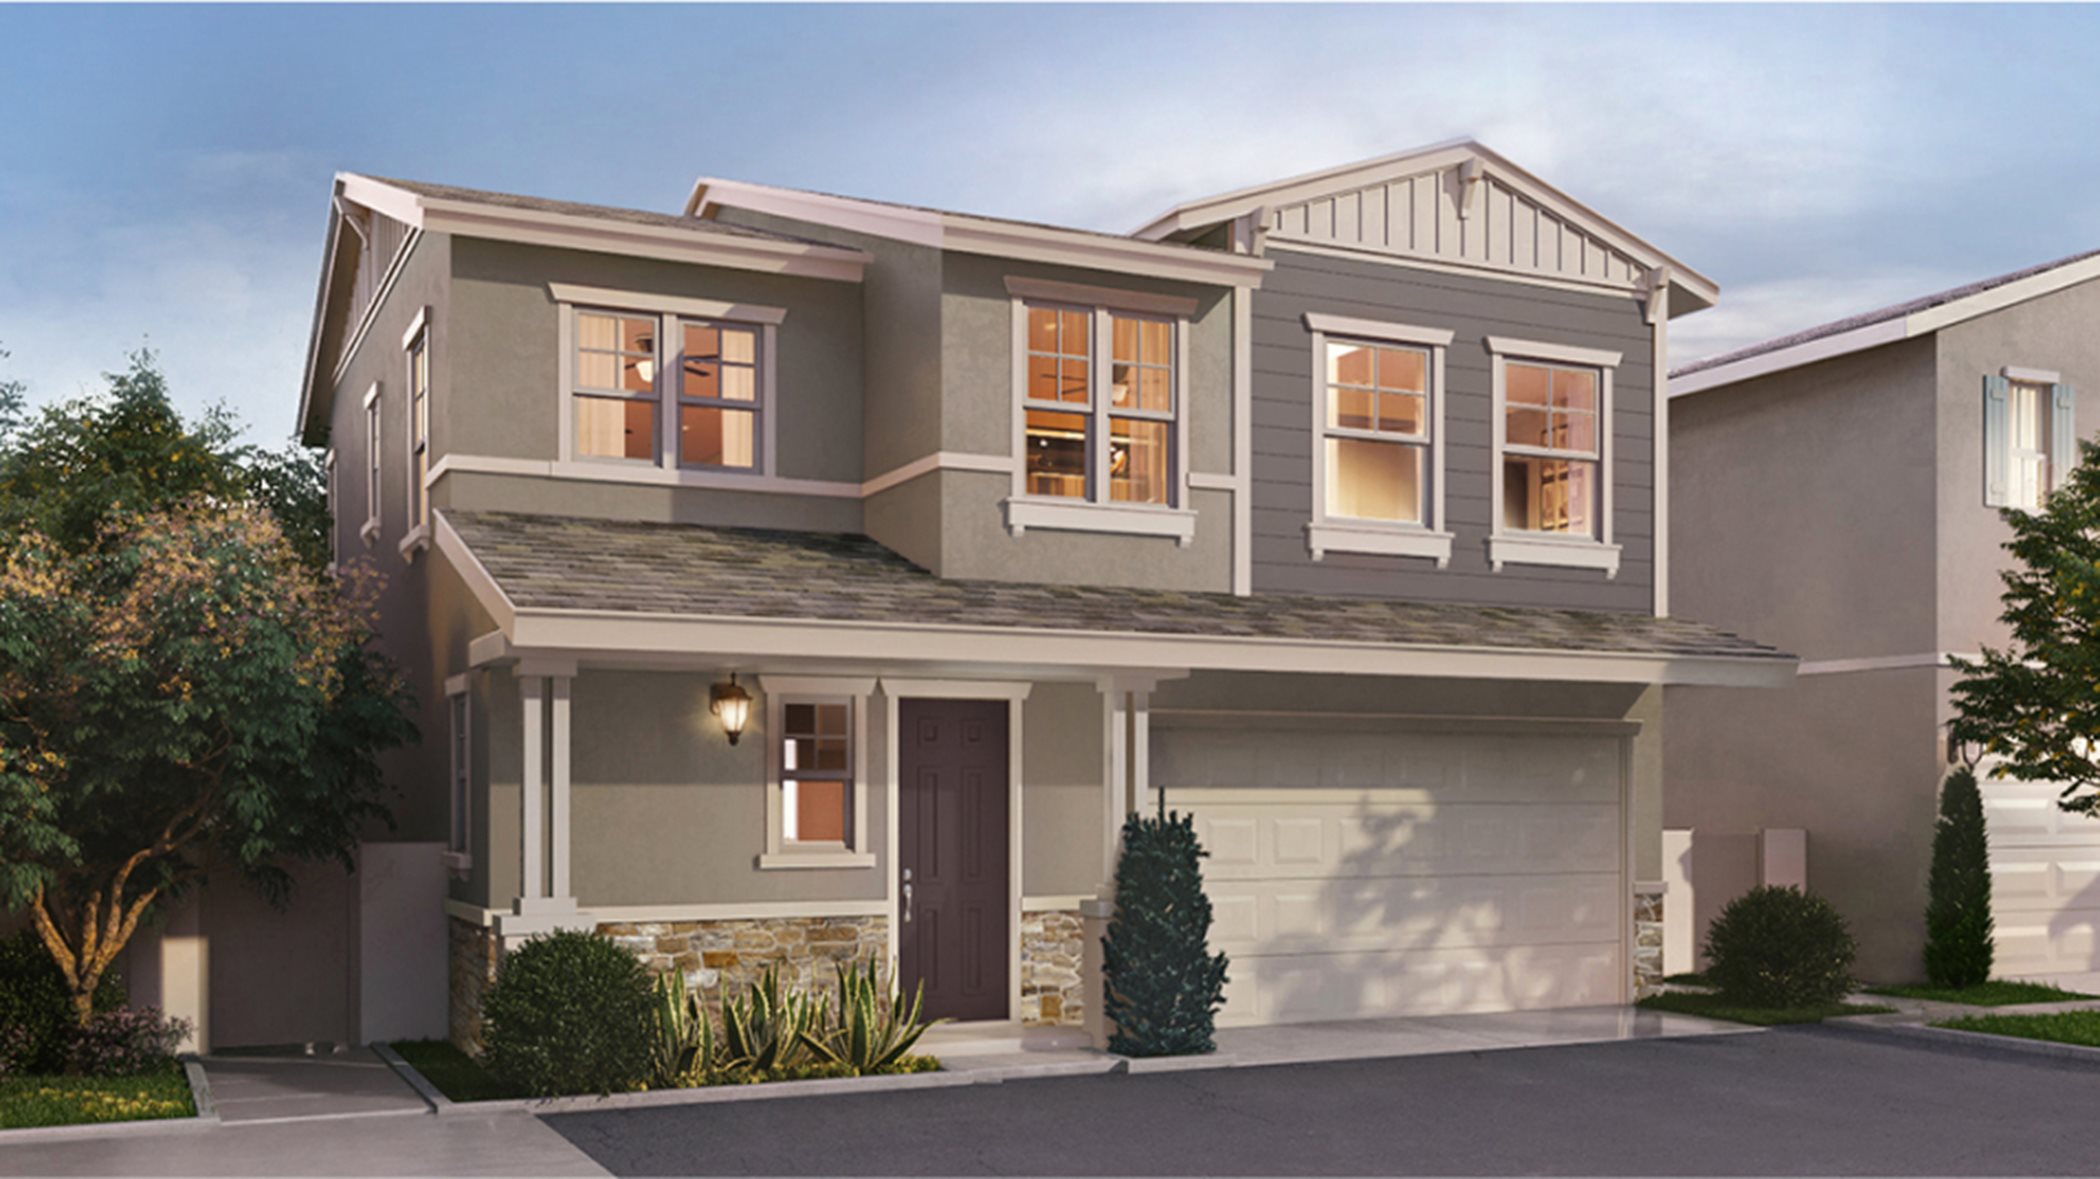 The Groves Harmony Residence 1 Craftsman